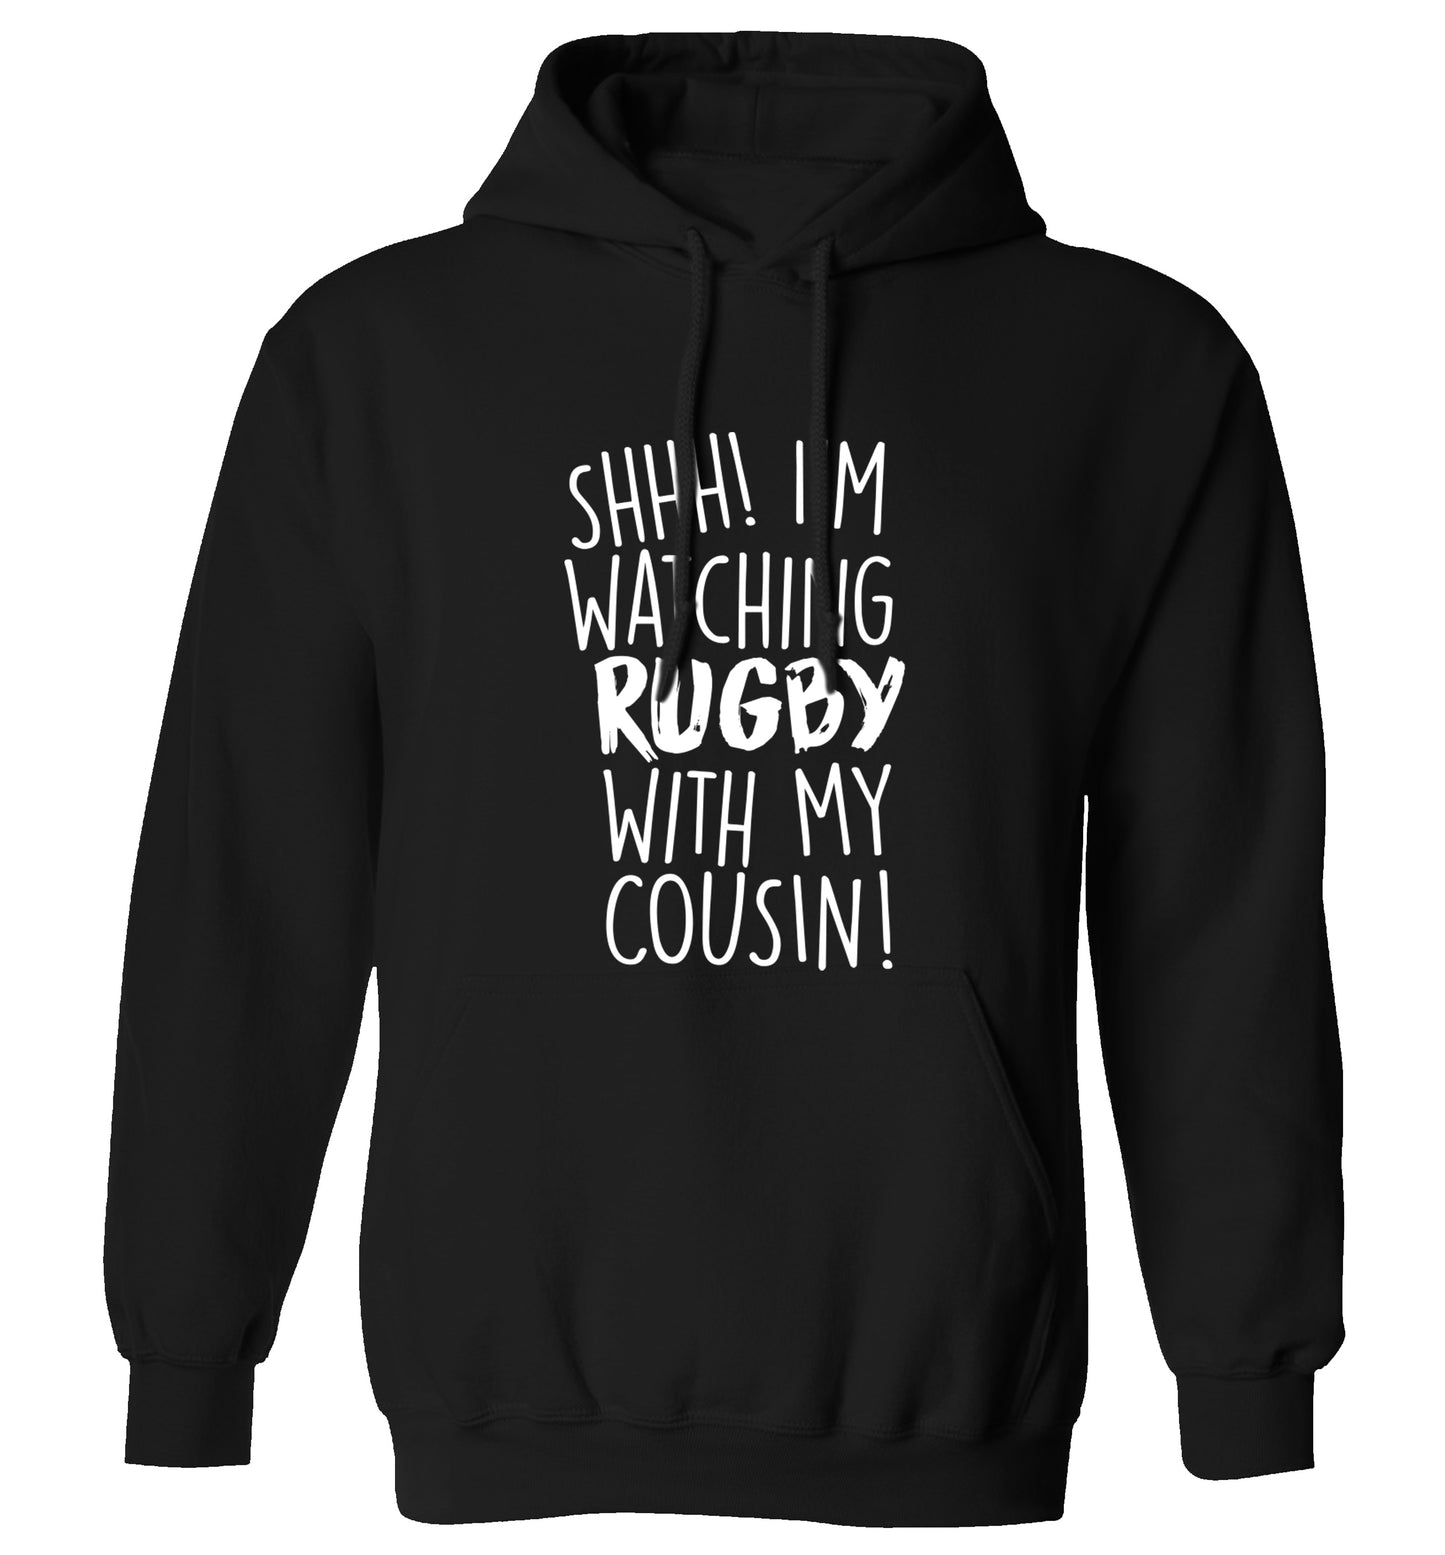 Shhh I'm watching rugby with my cousin adults unisex black hoodie 2XL